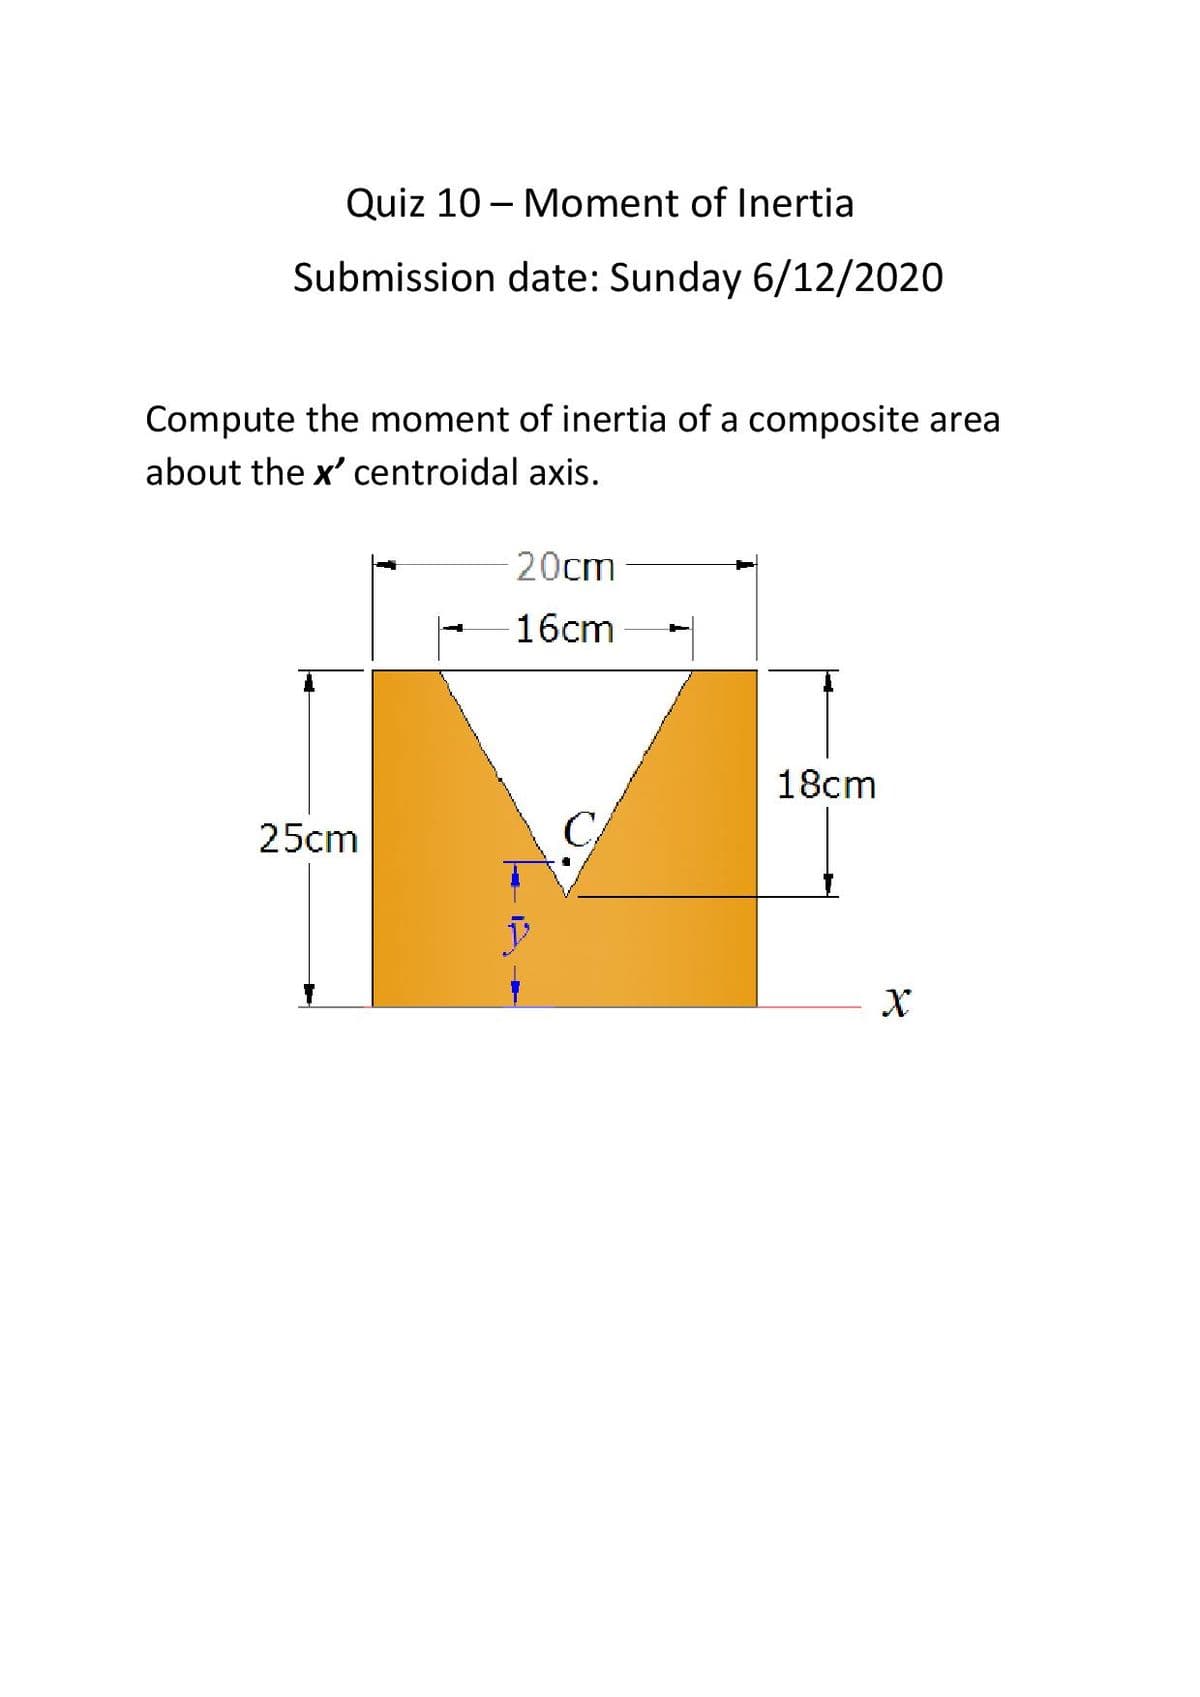 Quiz 10 - Moment of Inertia
Submission date: Sunday 6/12/2020
Compute the moment of inertia of a composite area
about the x' centroidal axis.
20cm
16cm
18cm
25cm
C
